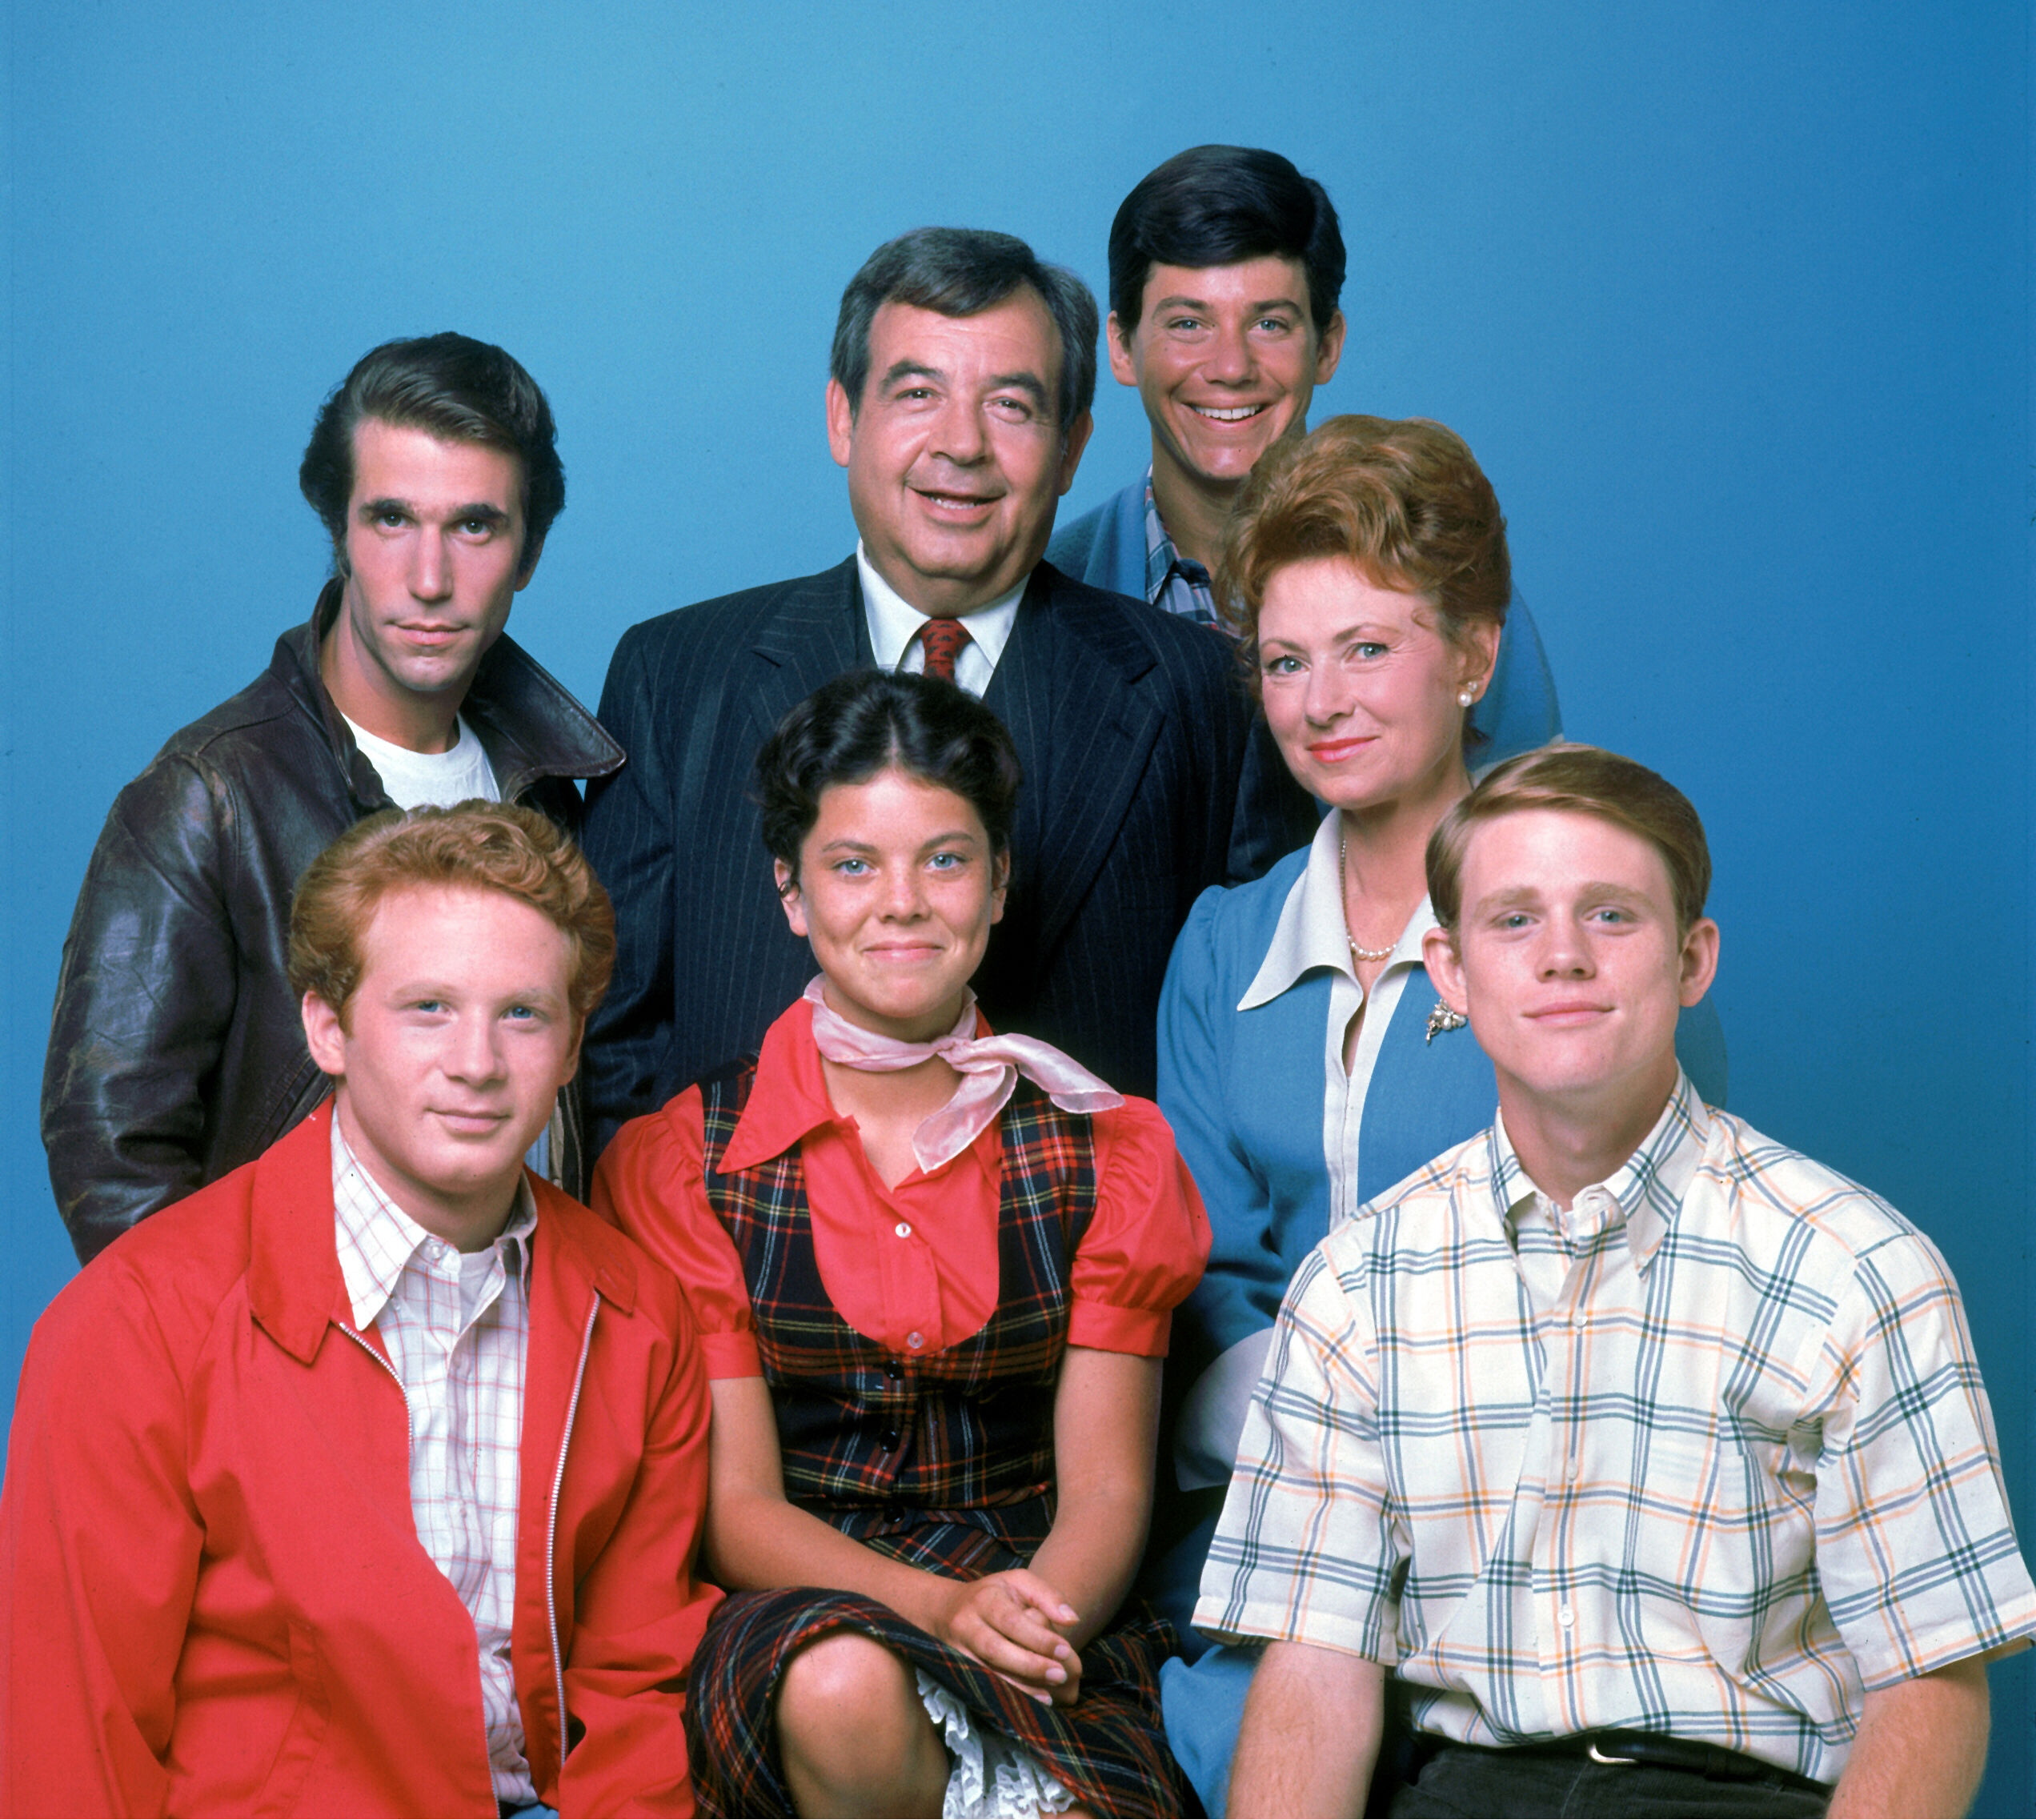 TV Show Happy Days HD Wallpaper | Background Image